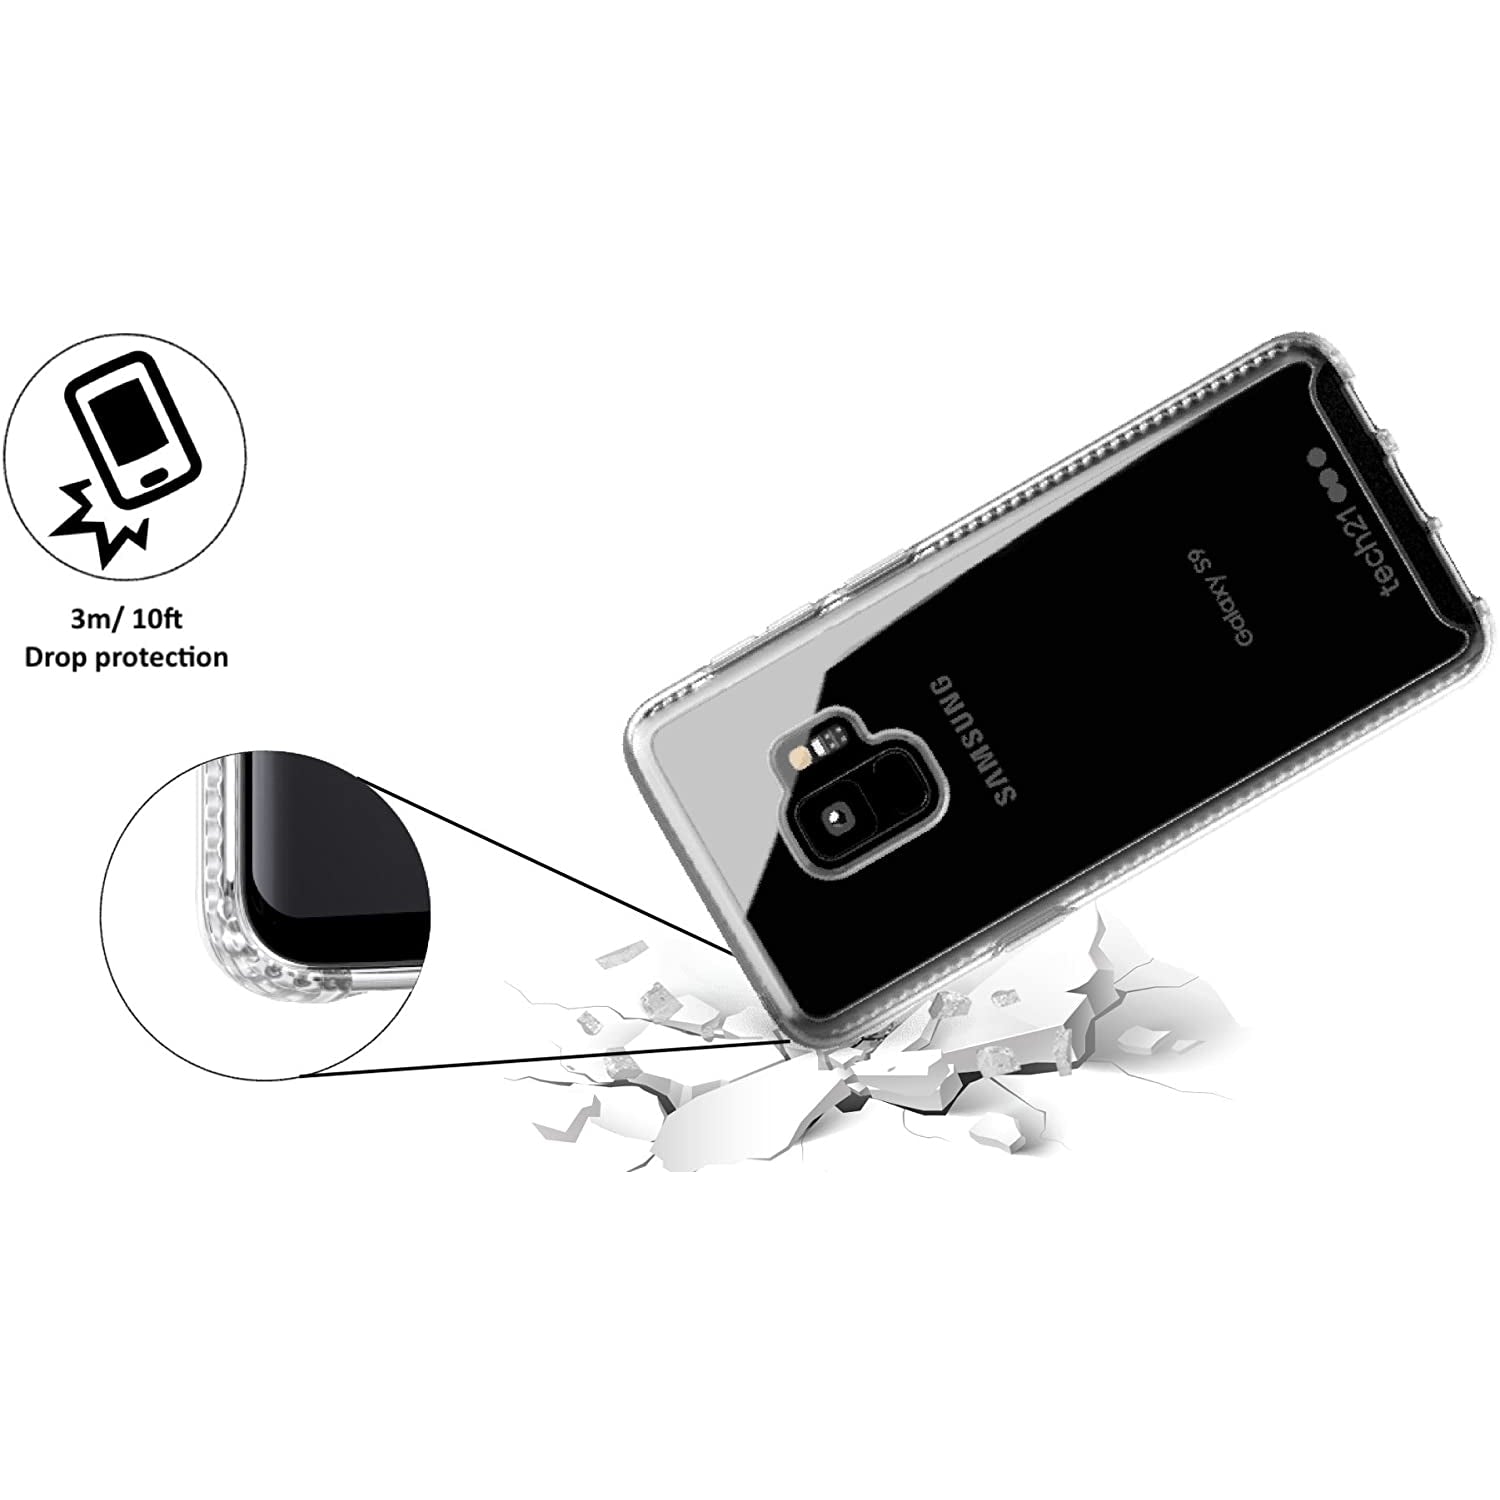 Tech21 Pure Clear Case for Samsung Galaxy S9 Plus - Clear